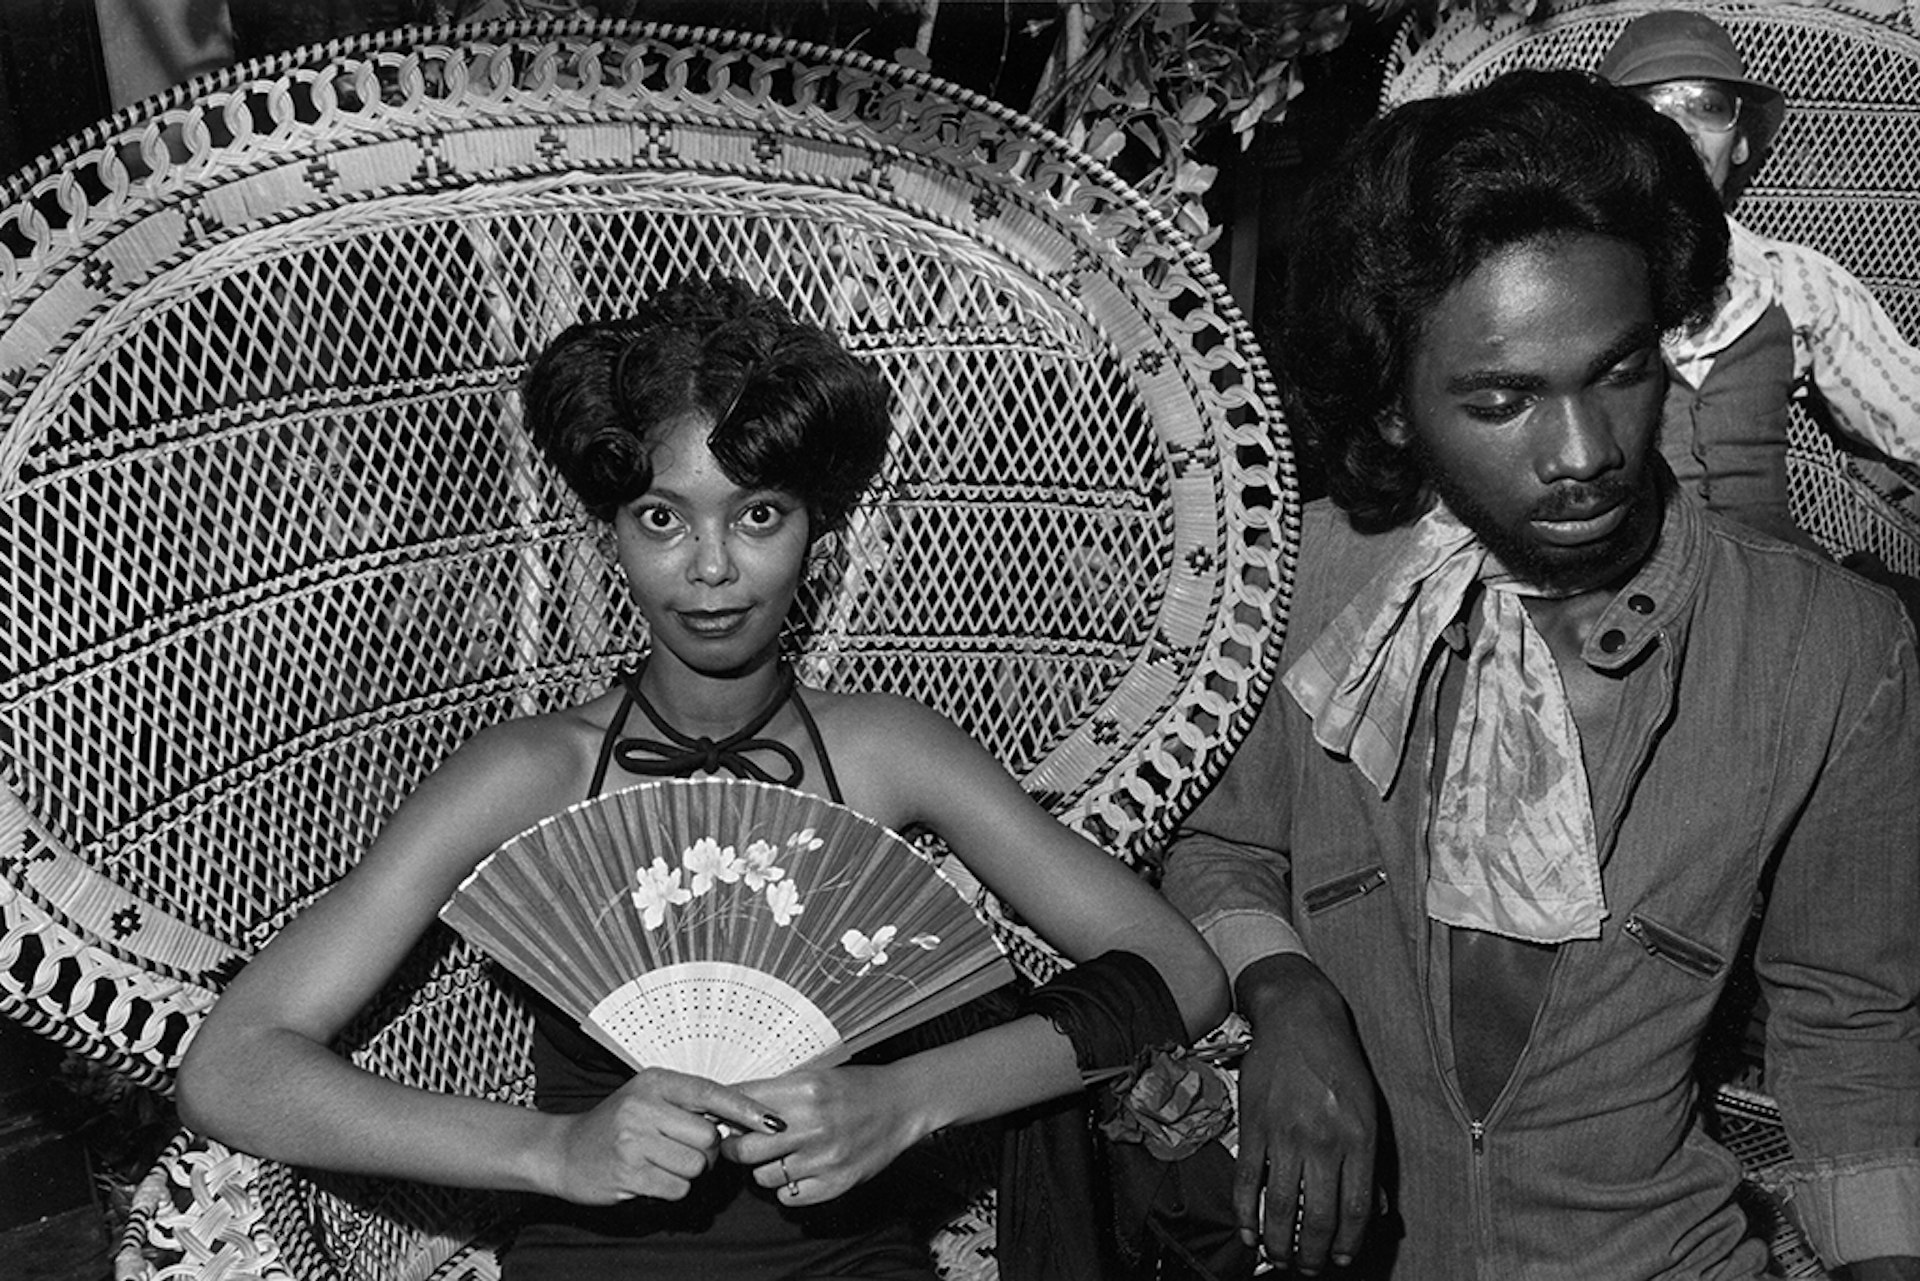 Documenting Chicago club culture in the ’70s